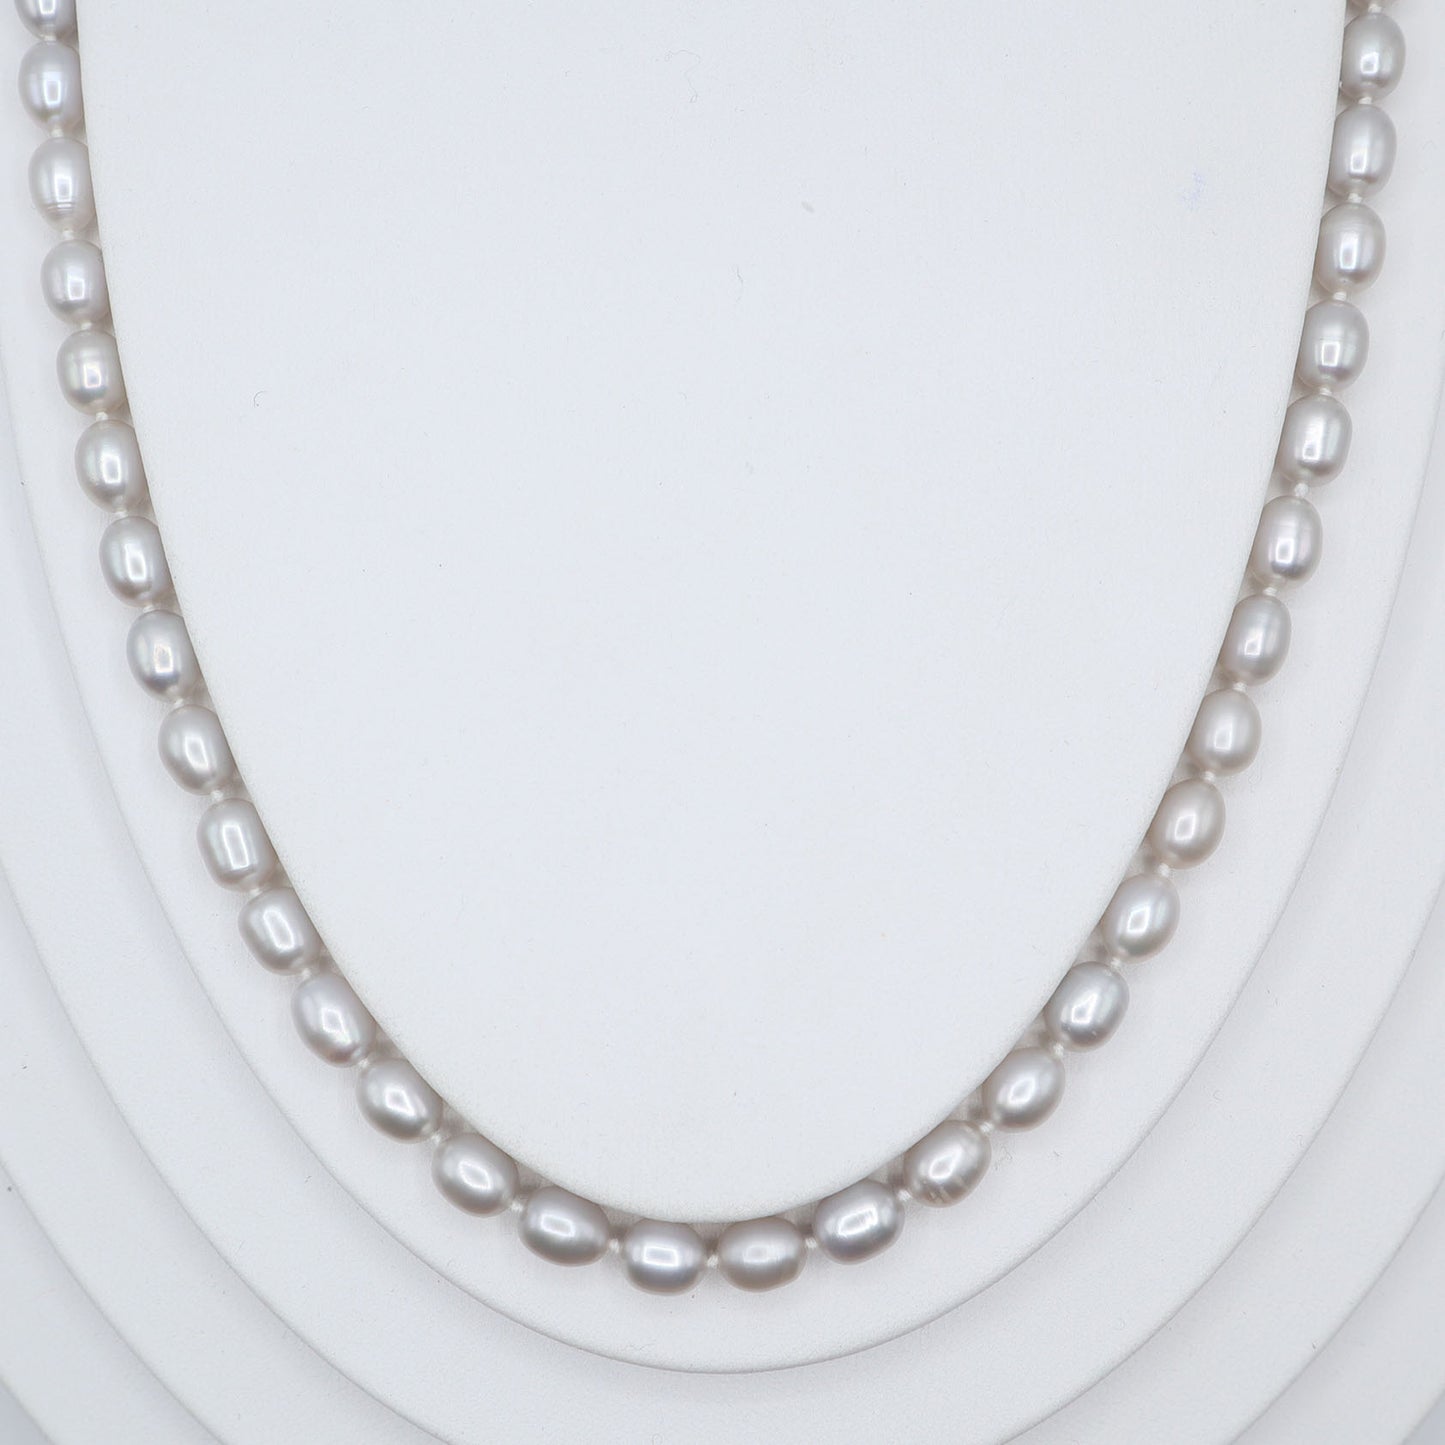 SALE 35% OFF - Grey Pearl Necklace